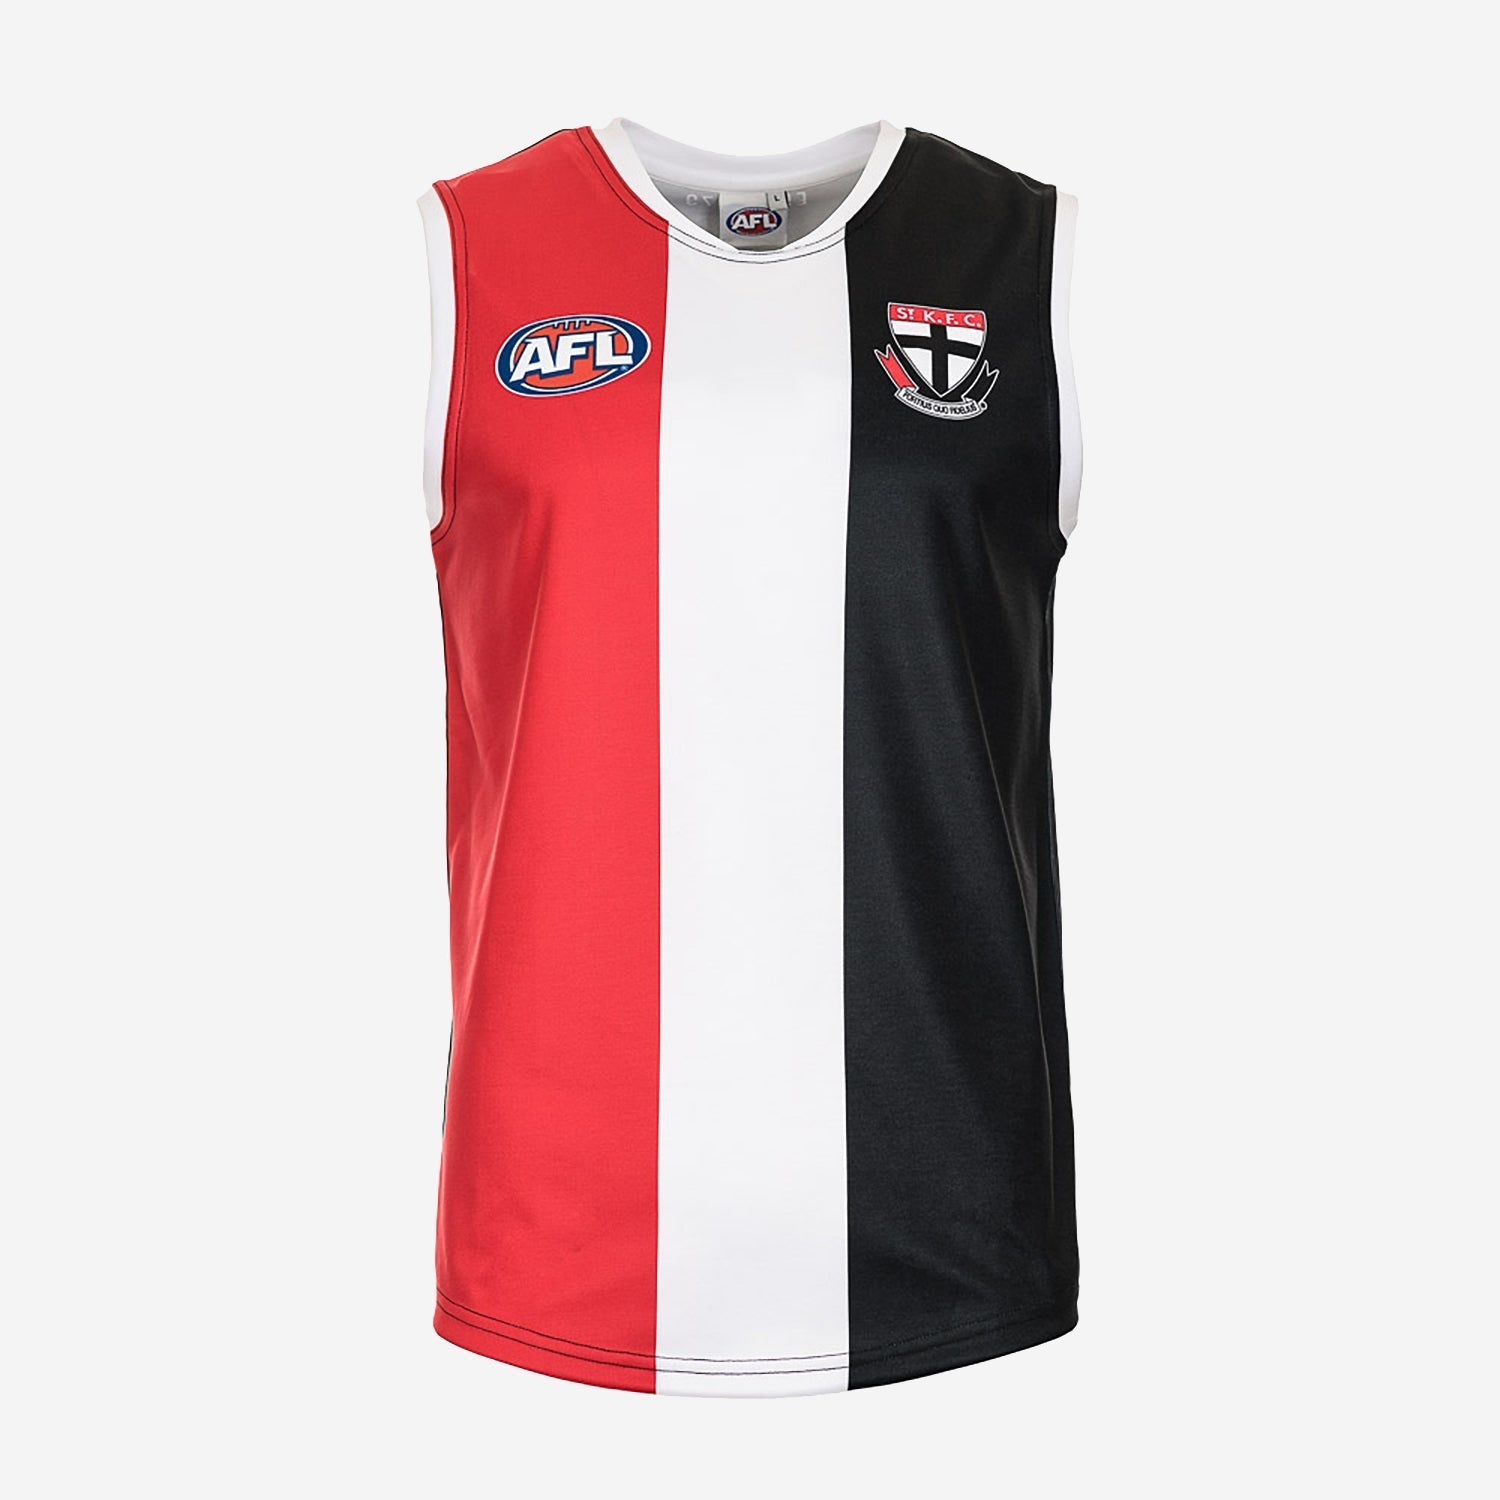 St Kilda Saints - AFL Replica Youth Guernsey - The Cricket Warehouse